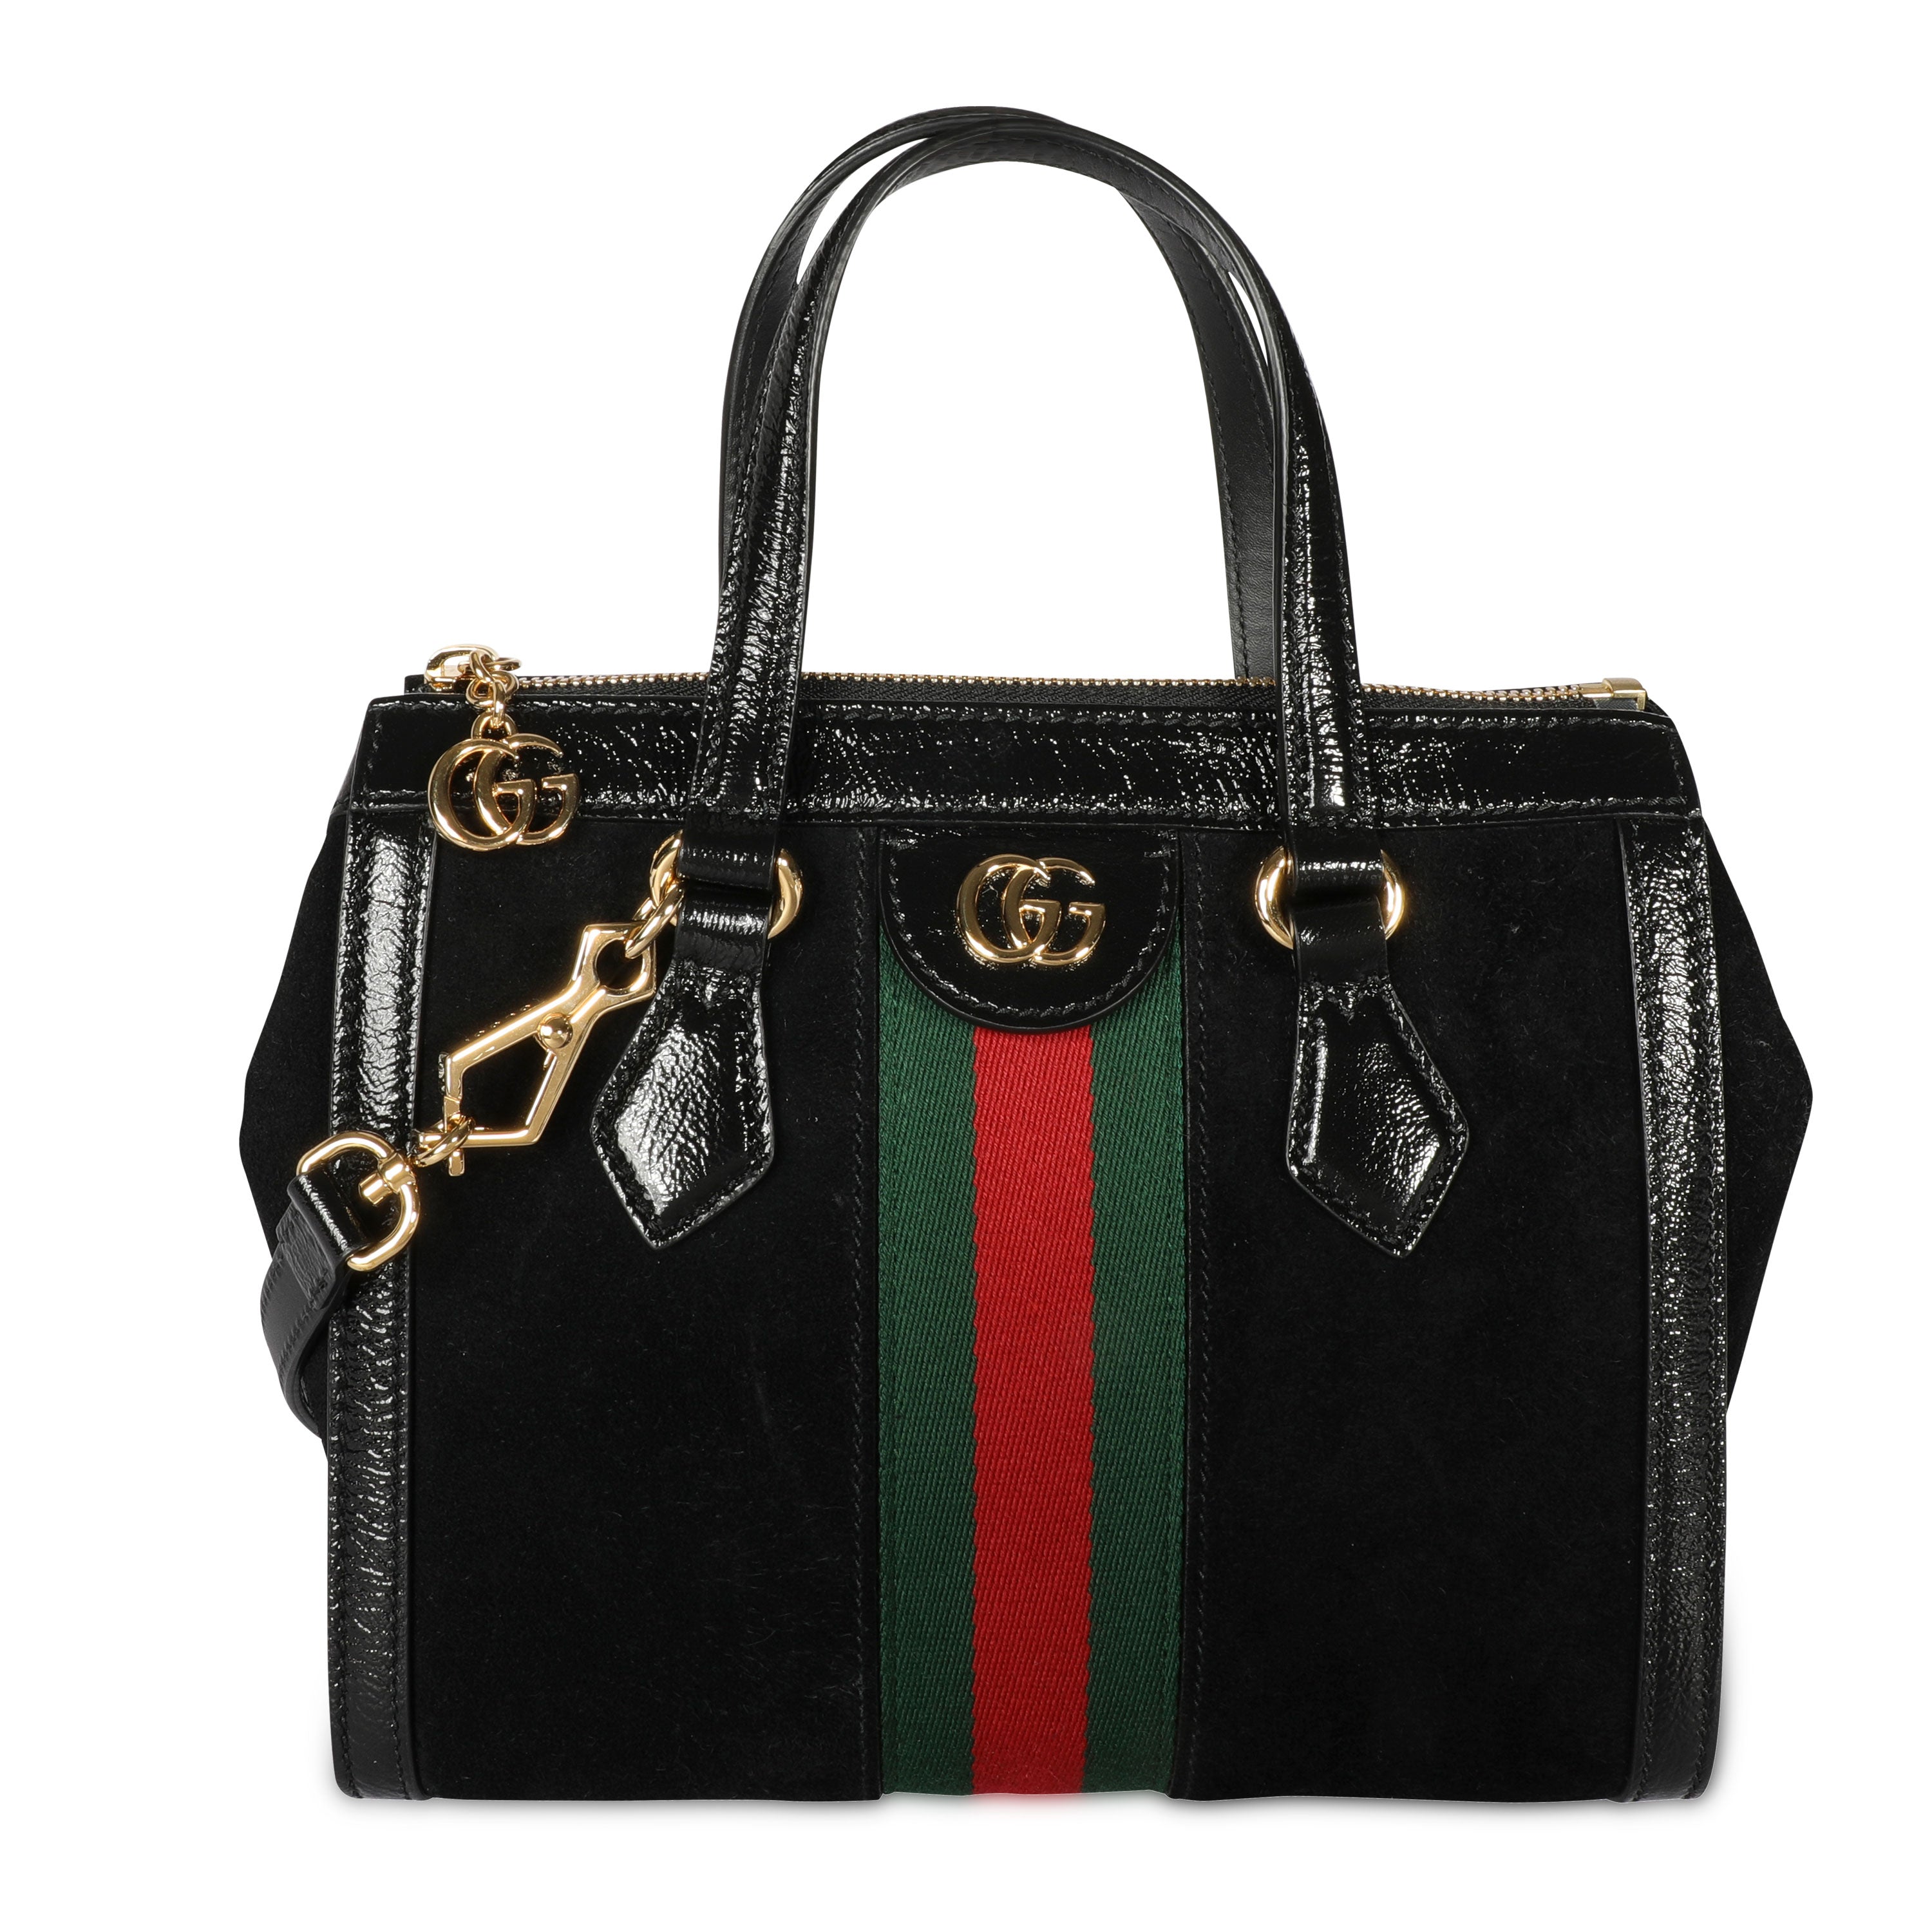 16 best designer bags you can buy under S$500